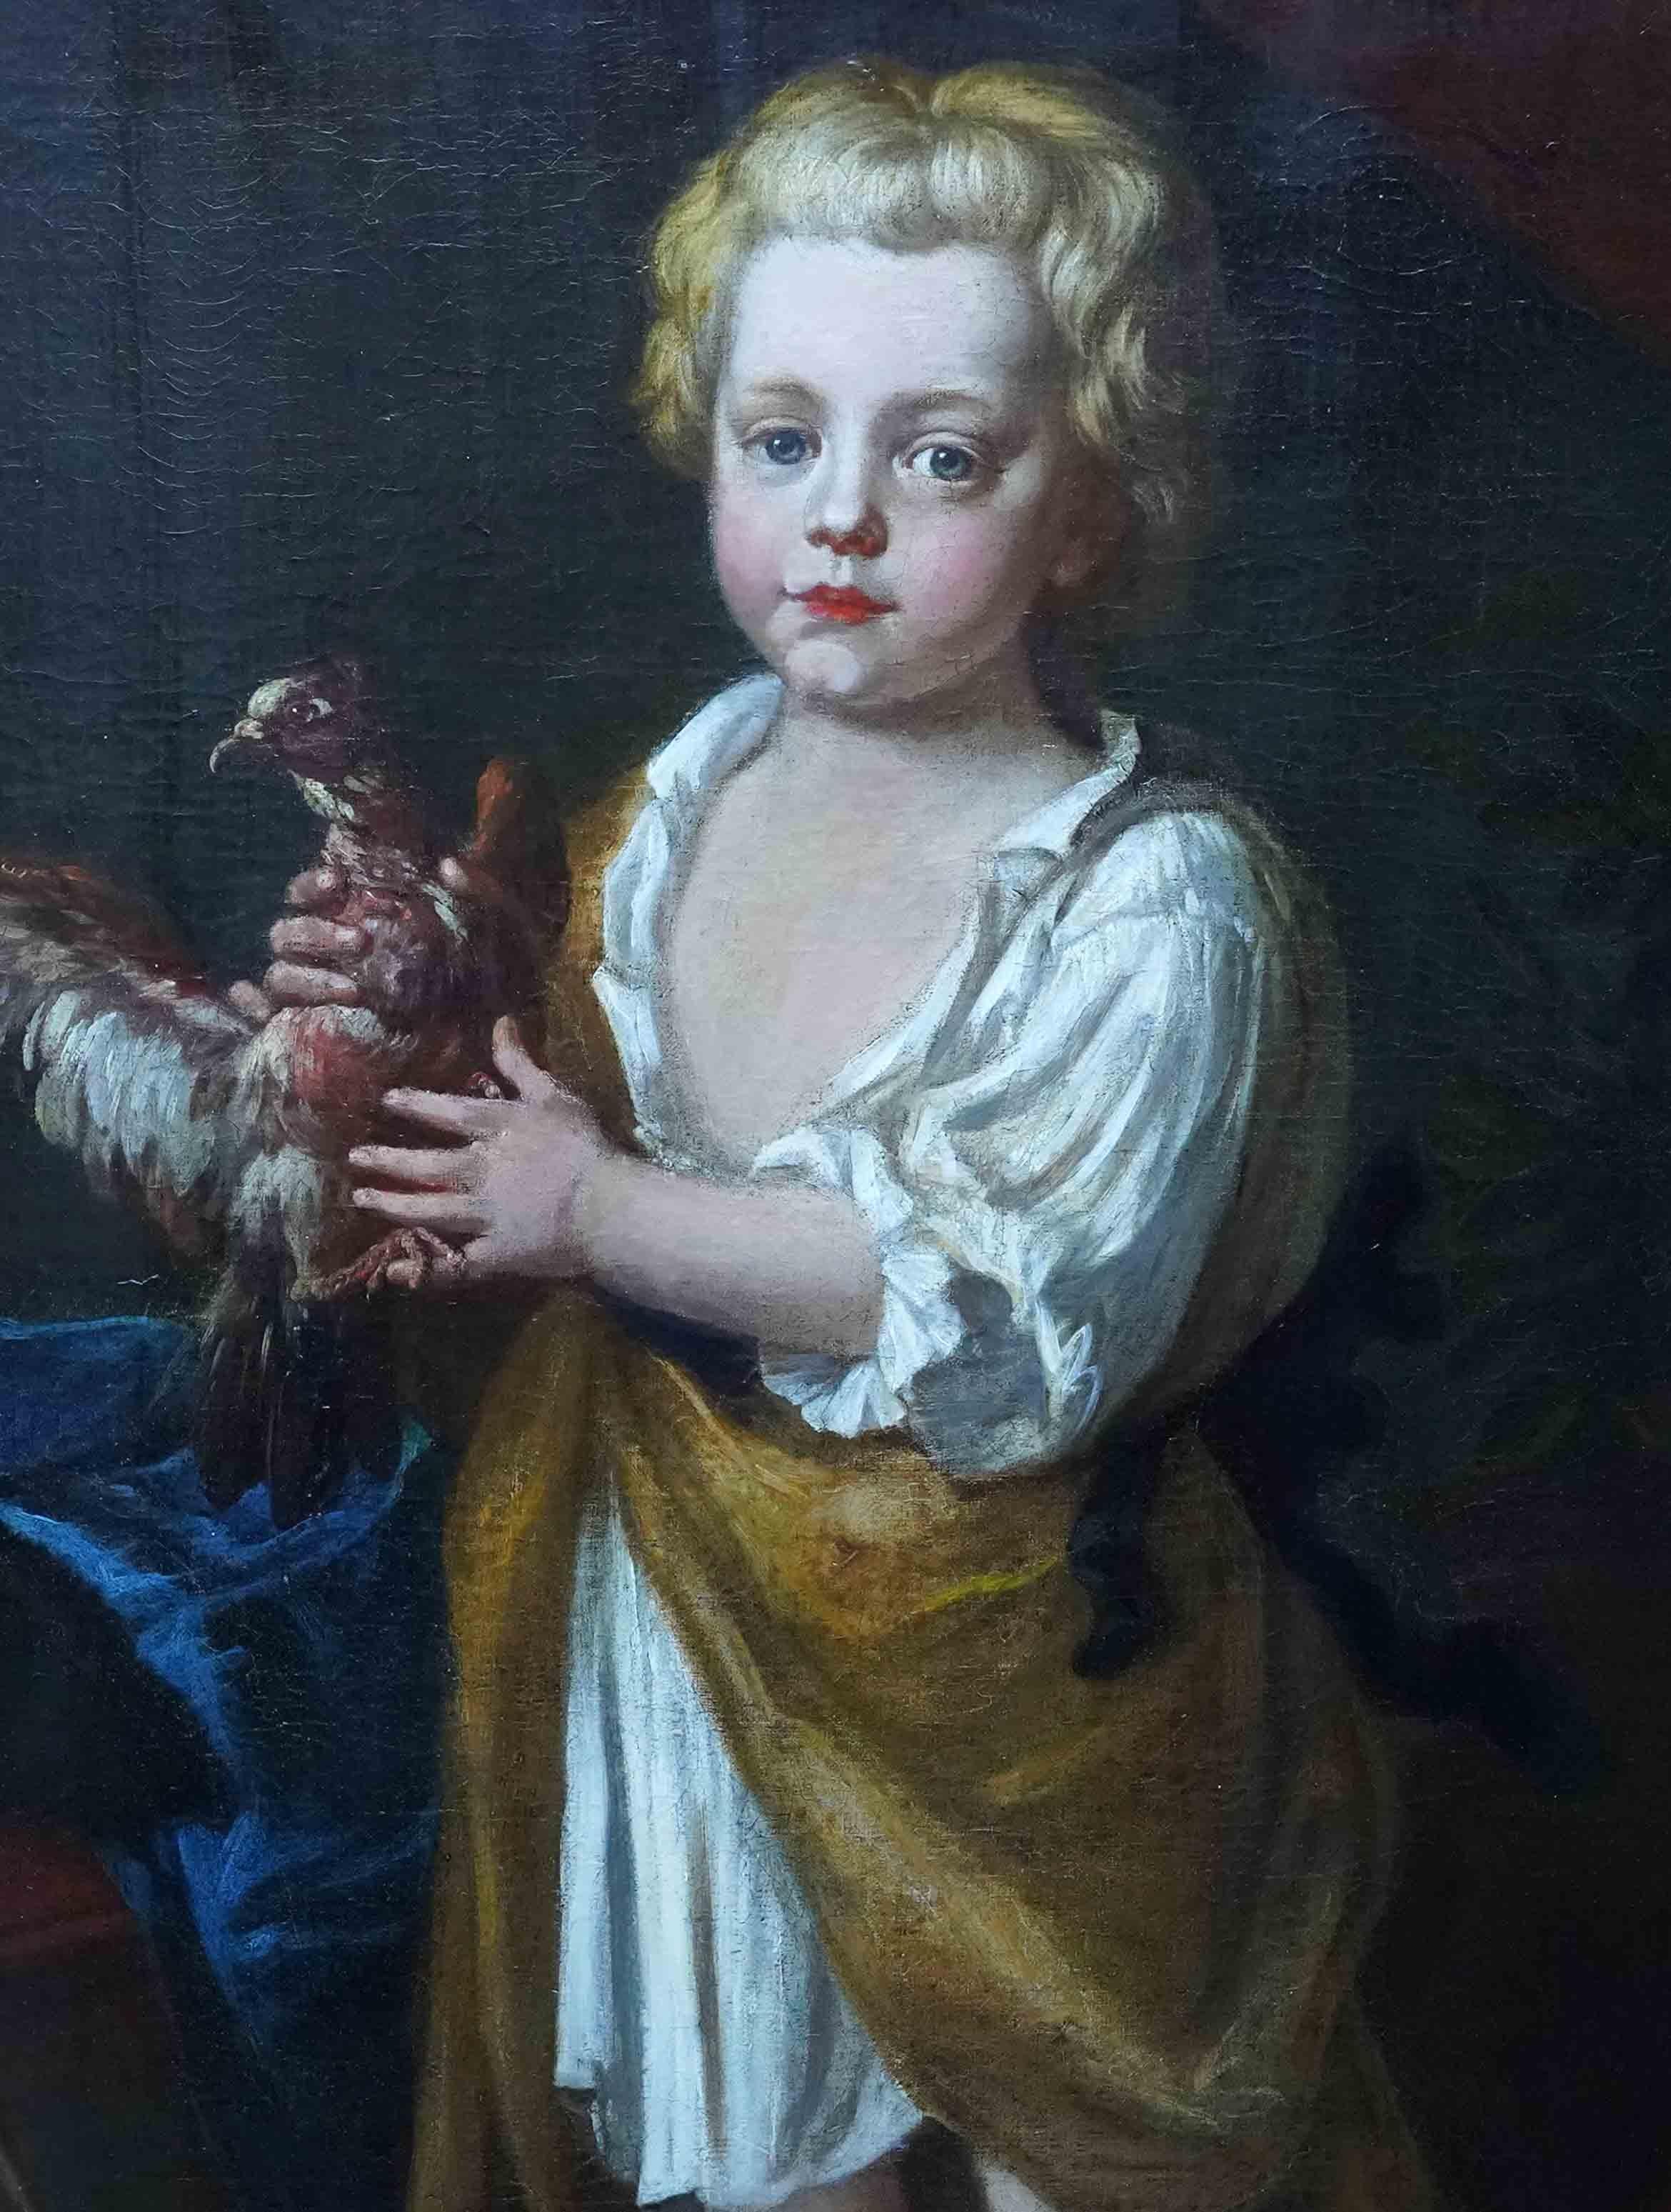 in the 18th century gainsborough painting the blue boy what is the boy holding in his hand